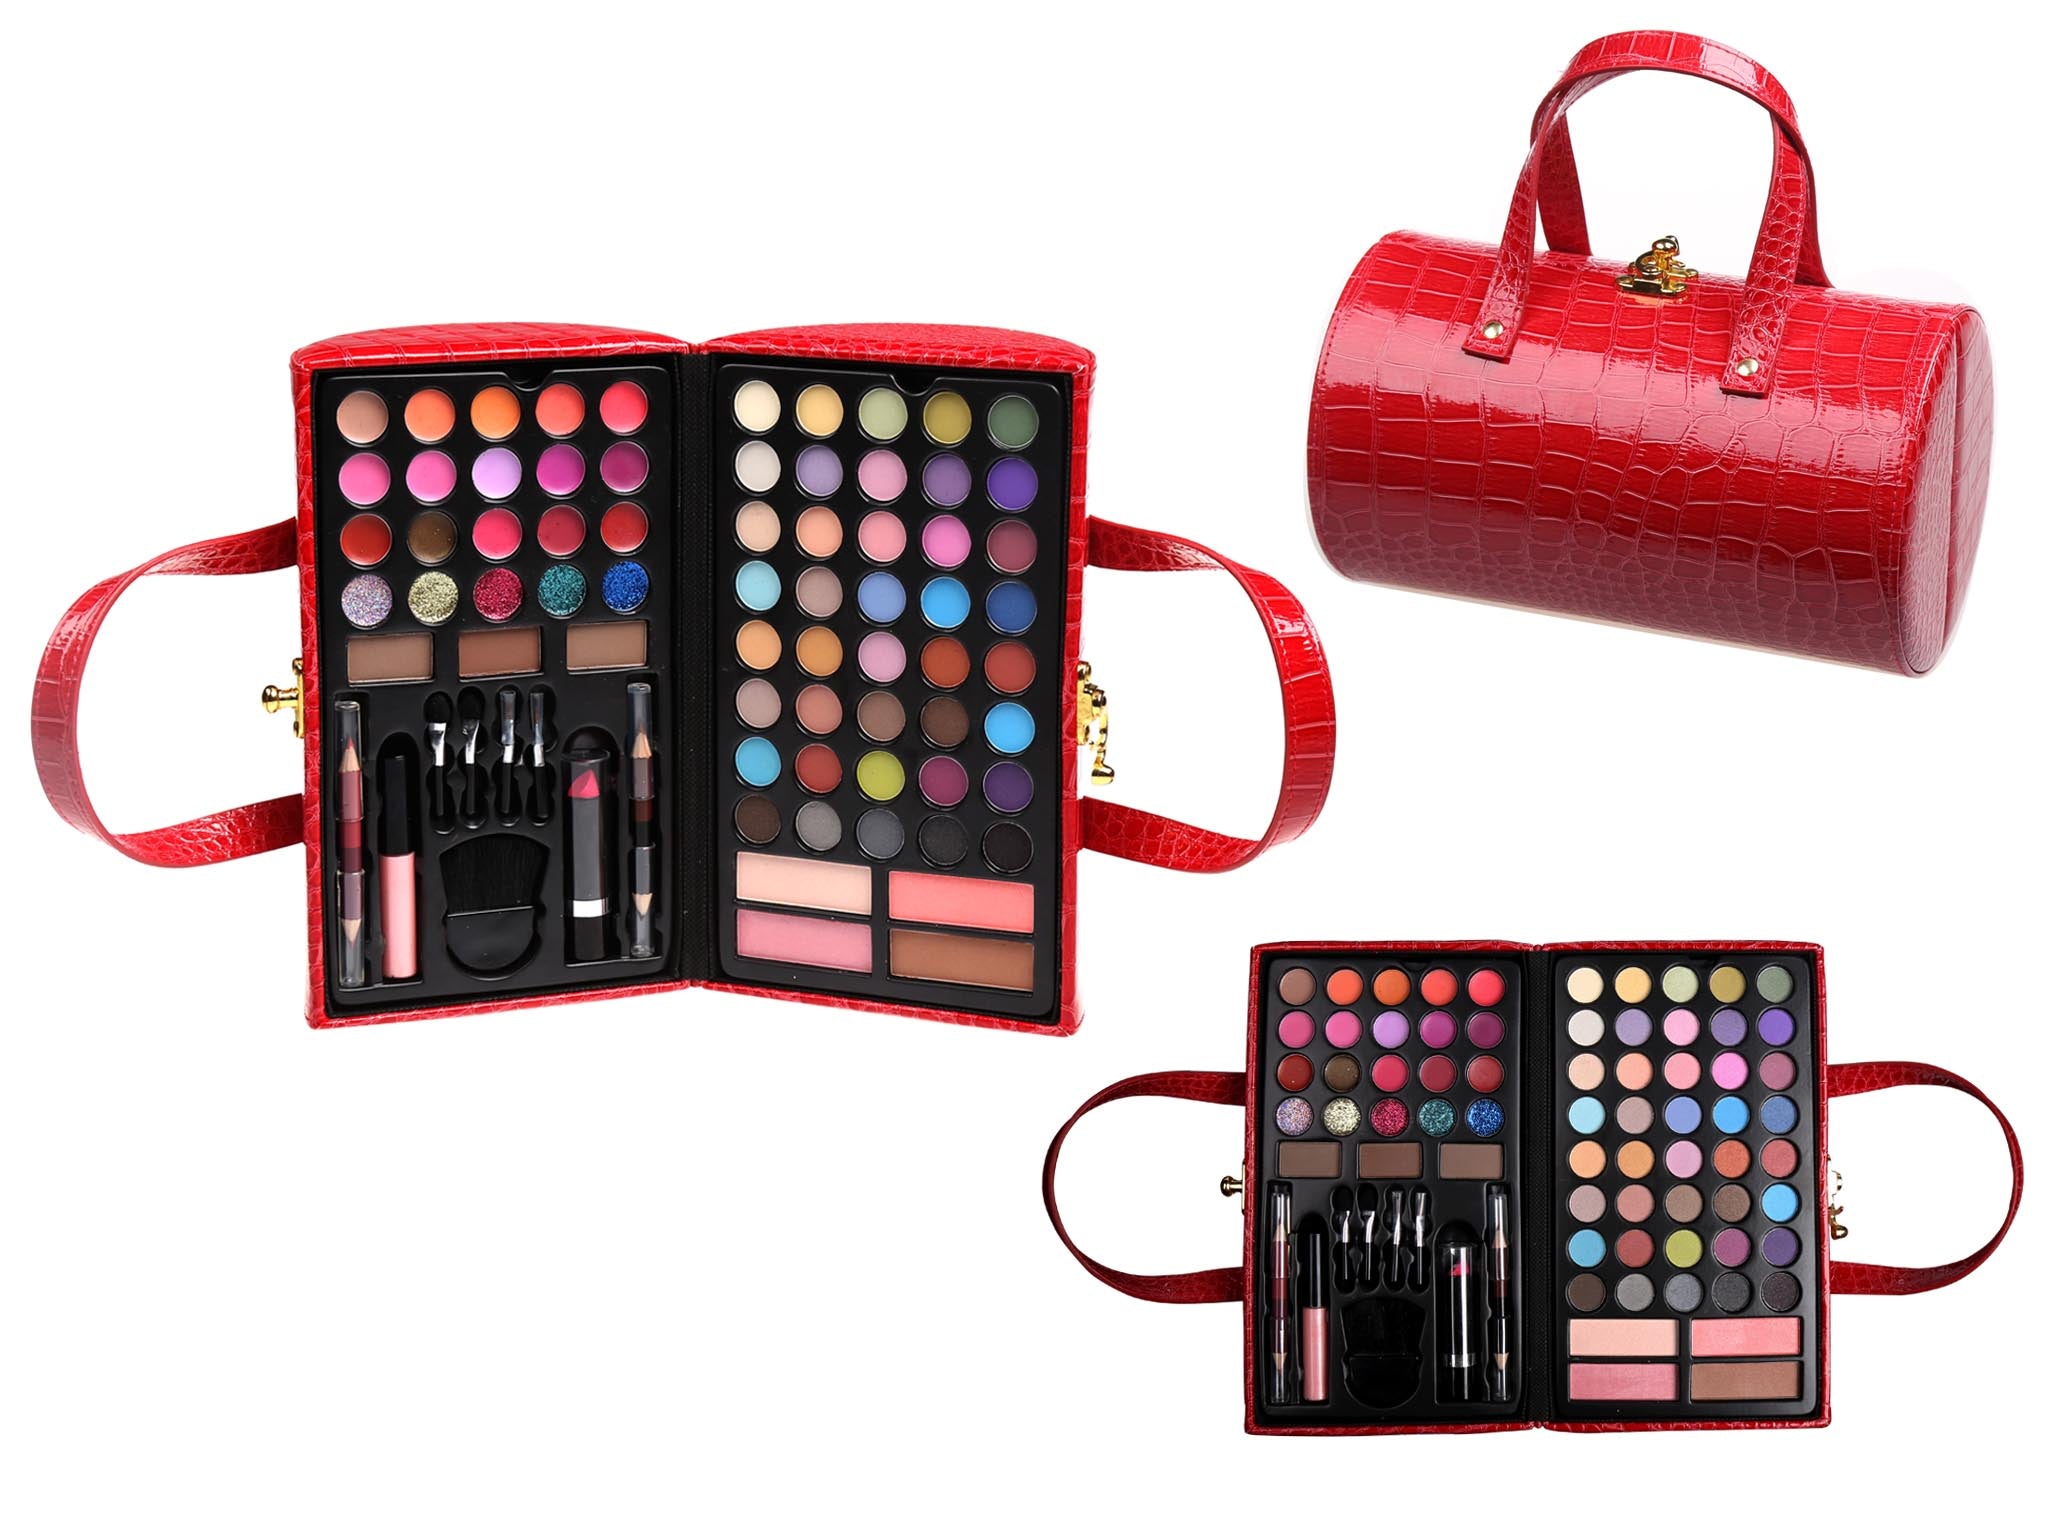 Source Girls Purse Makeup sets with real playing on m.alibaba.com